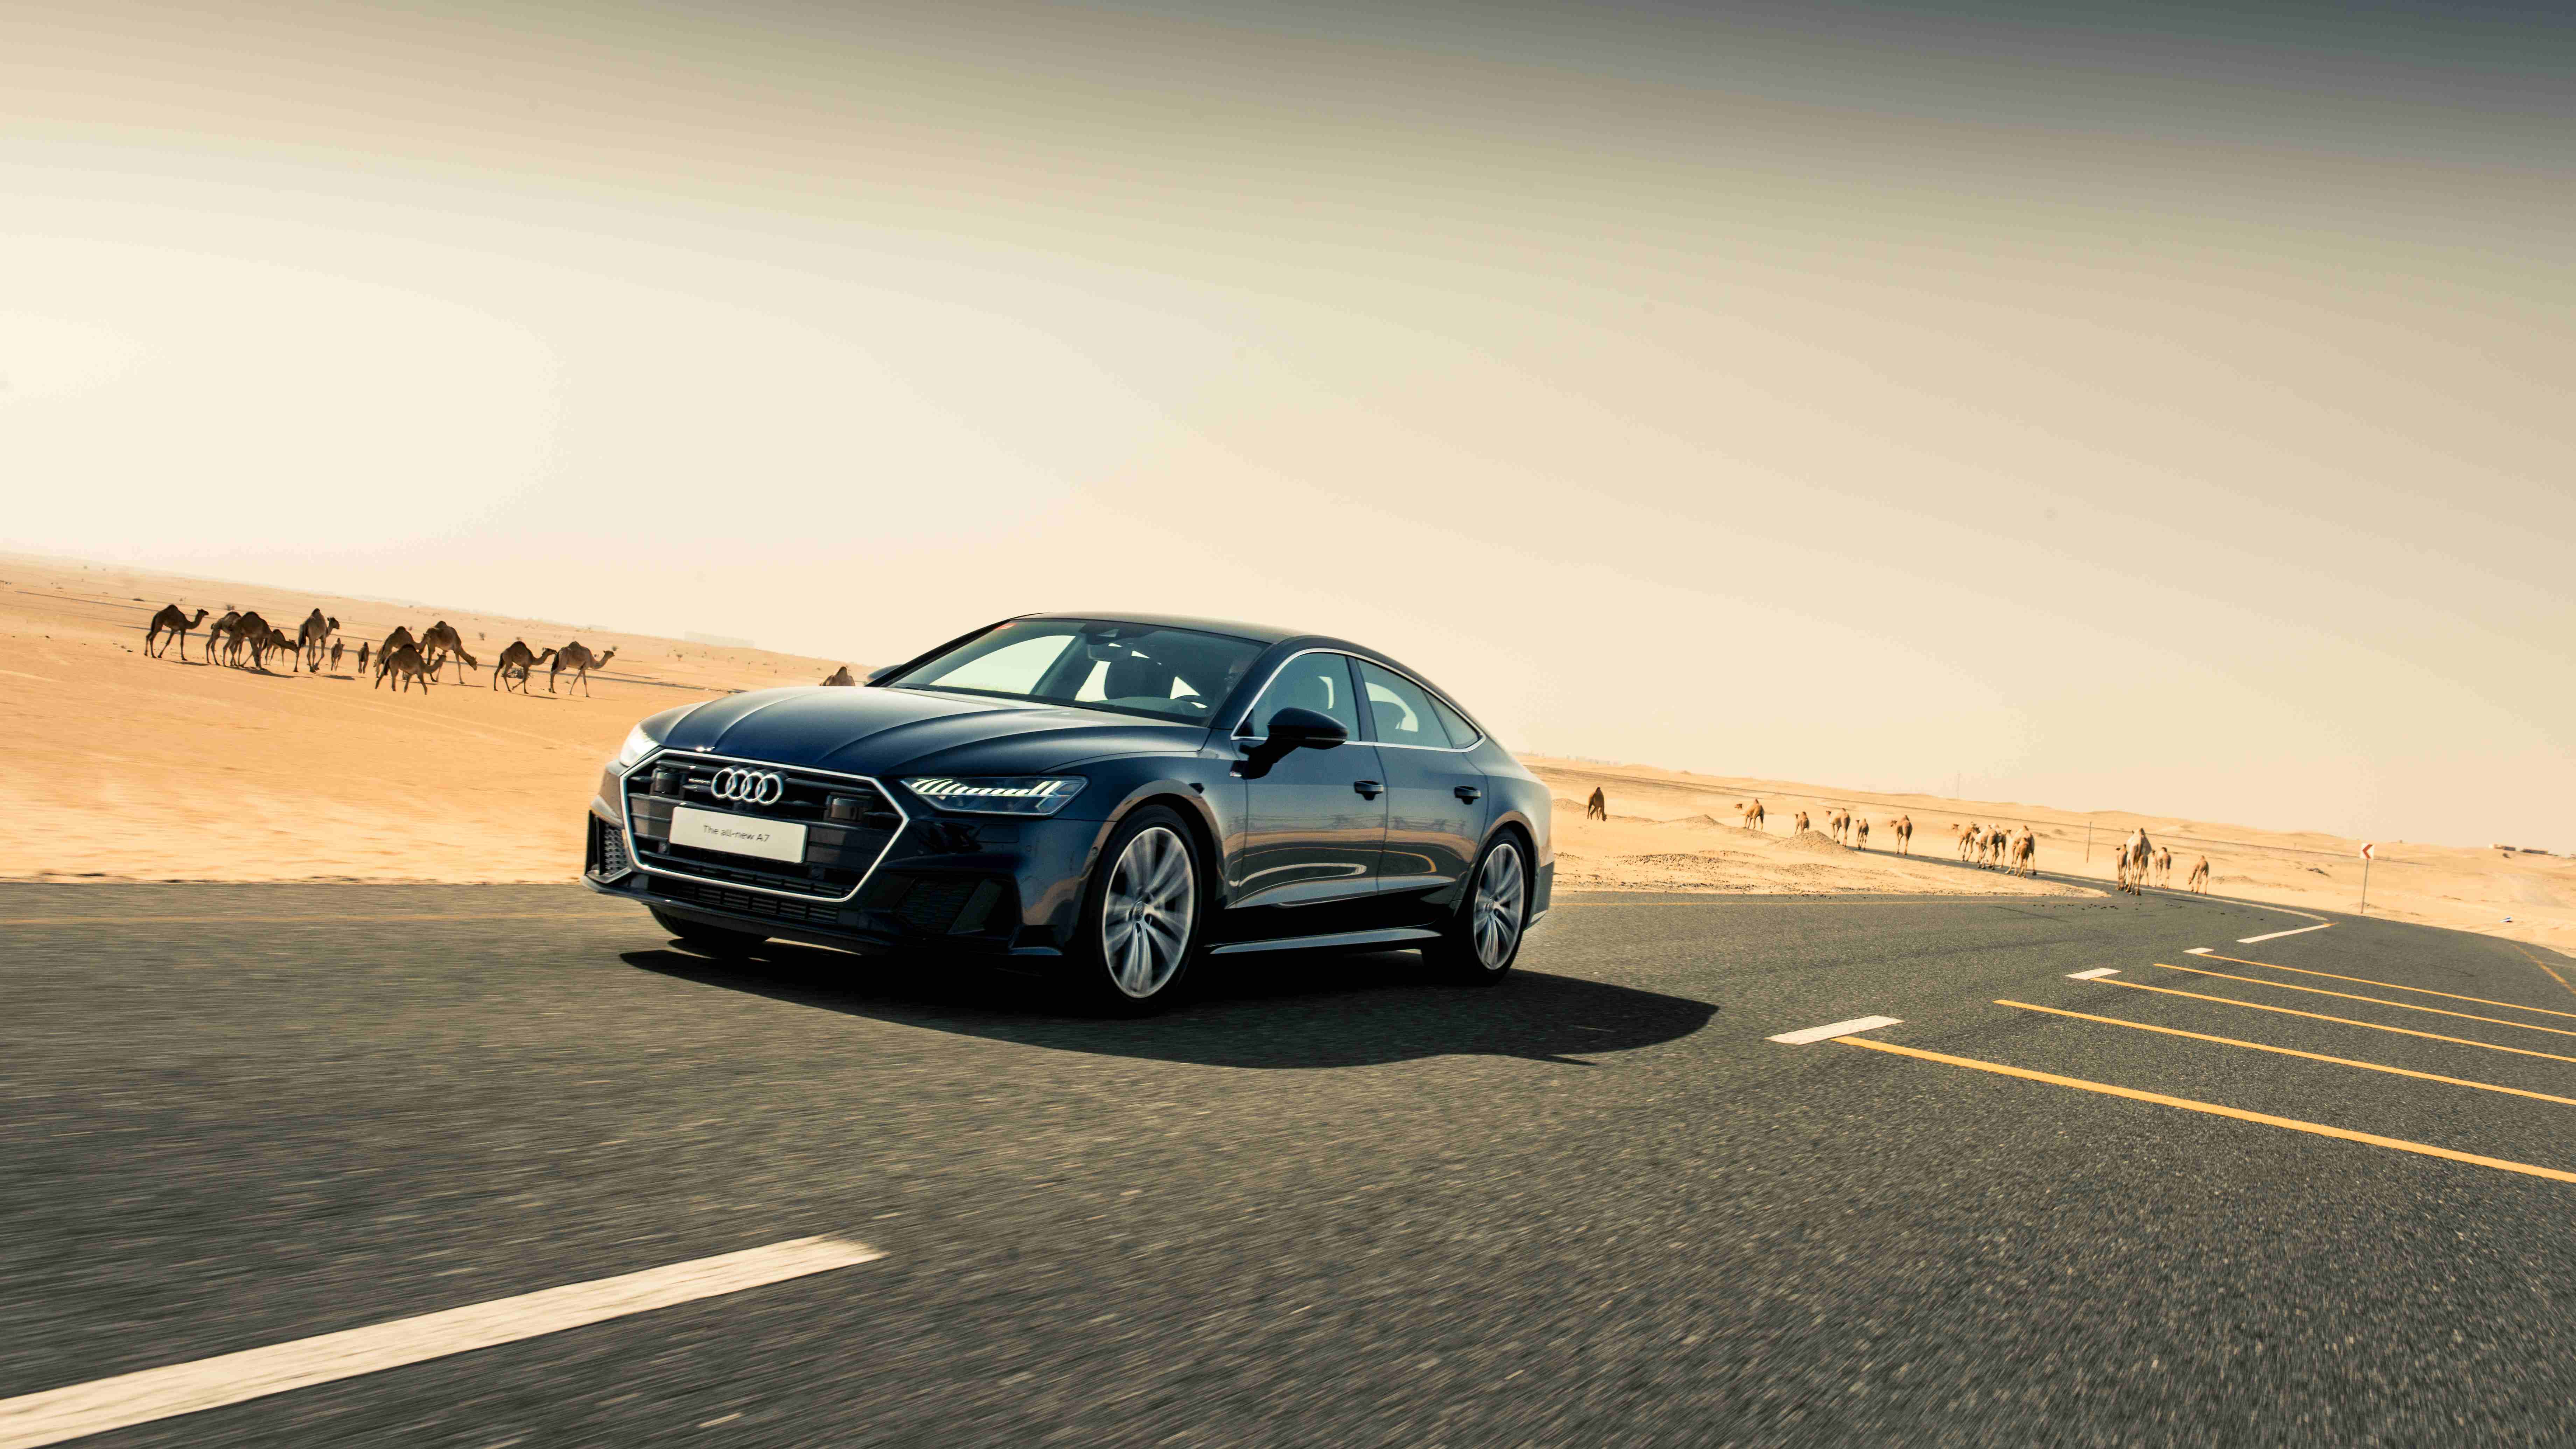 Audi Took Home the Most Titles at the Annual MECOTY Awards